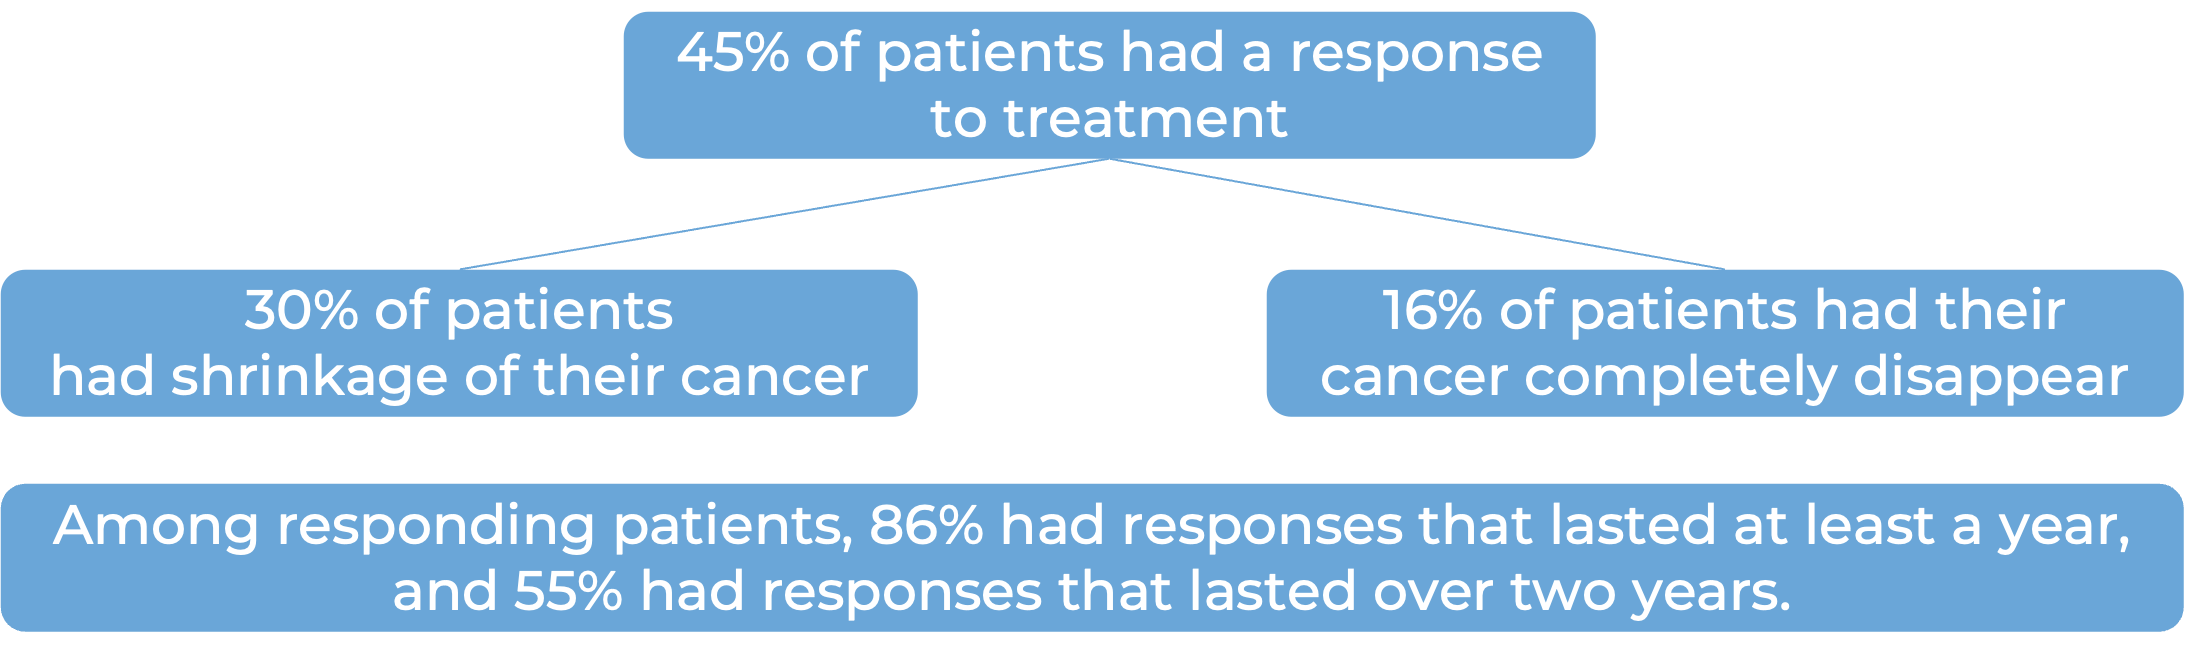 Results after treatment with Jemperli (diagram)